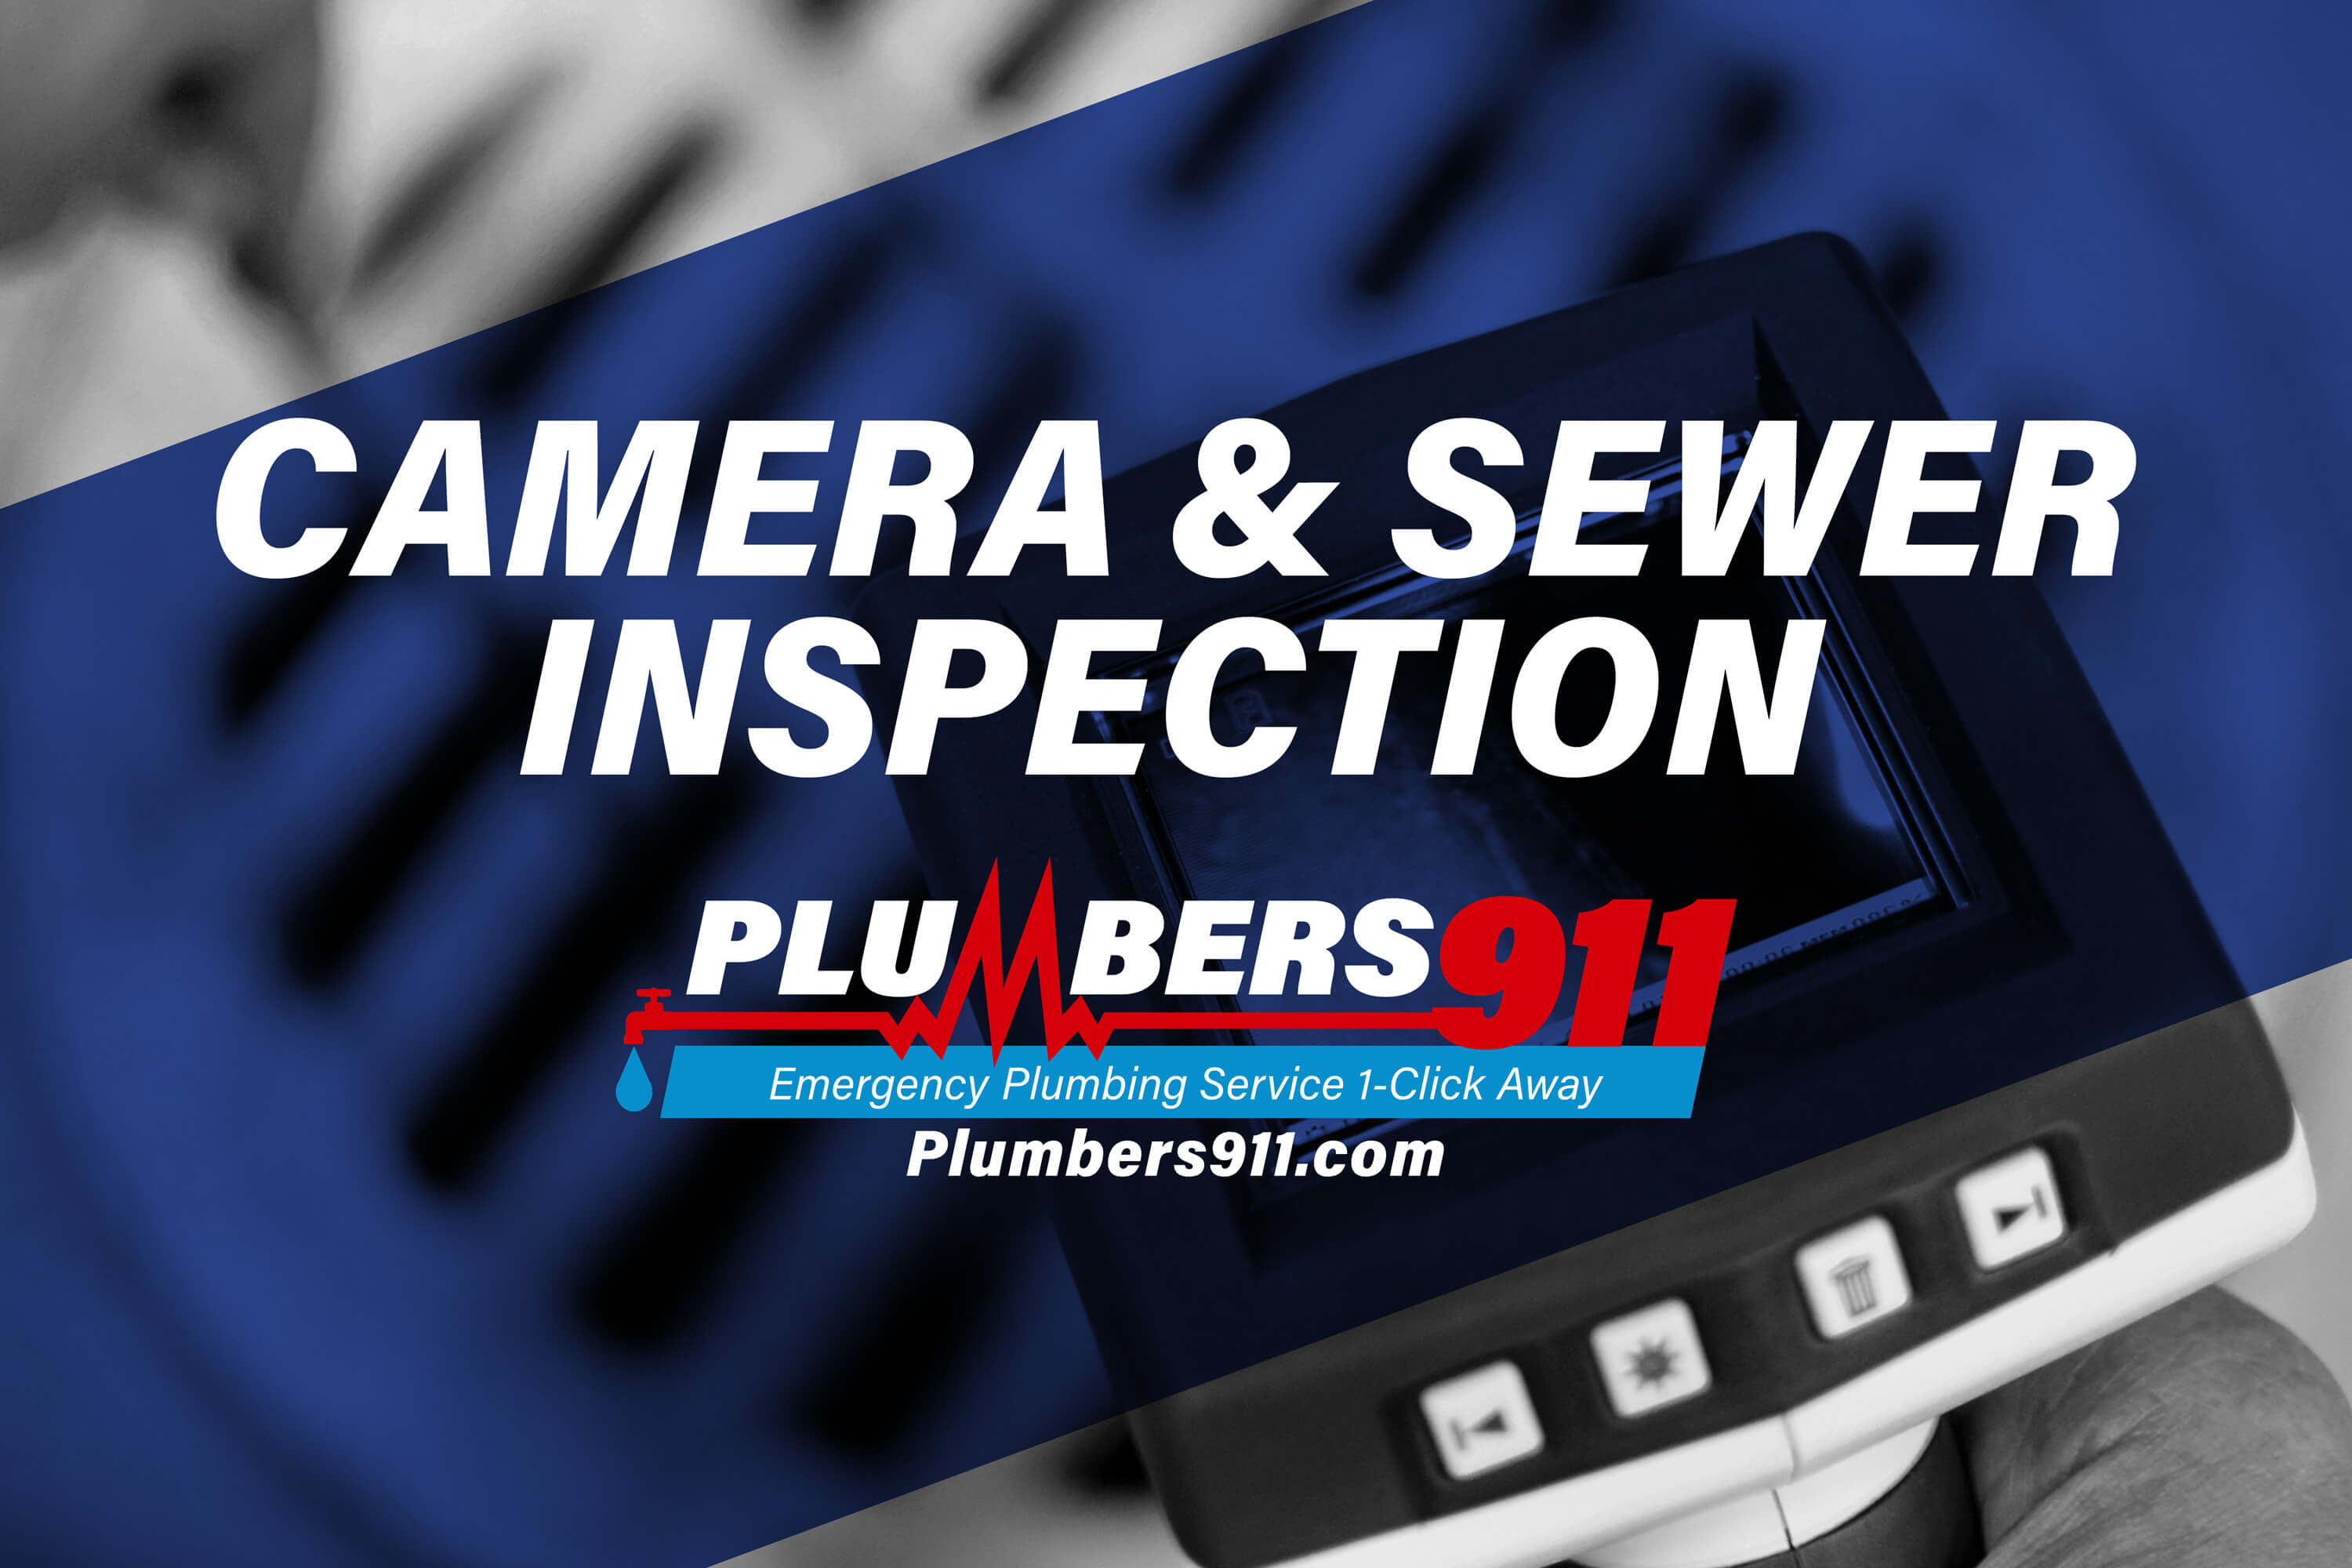 Plumbers 911 - Emergency Plumbing Services - Camera and Sewer Inspection